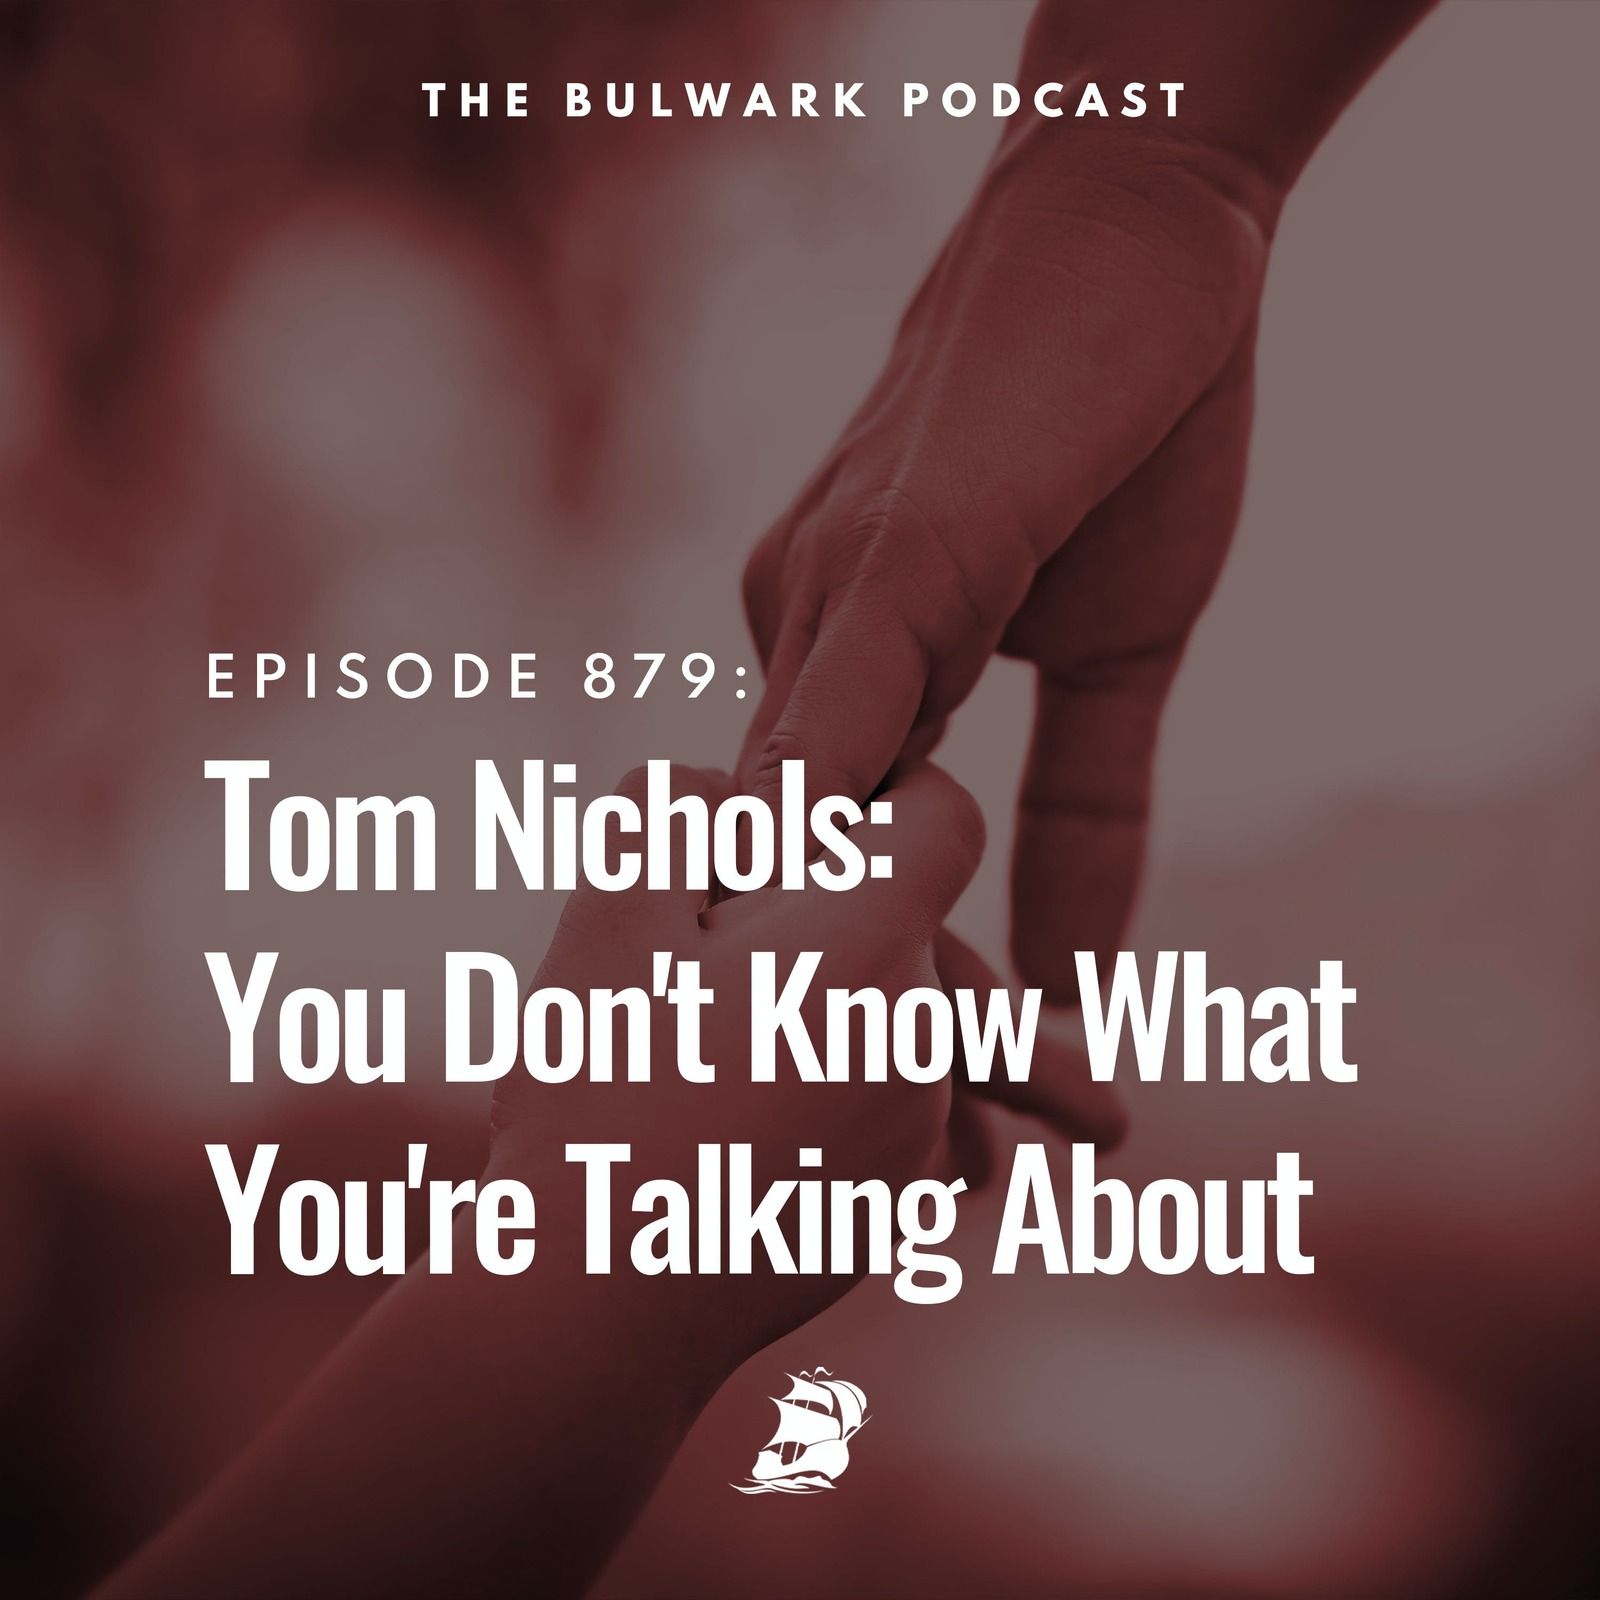 Tom Nichols: You Don't Know What You're Talking About